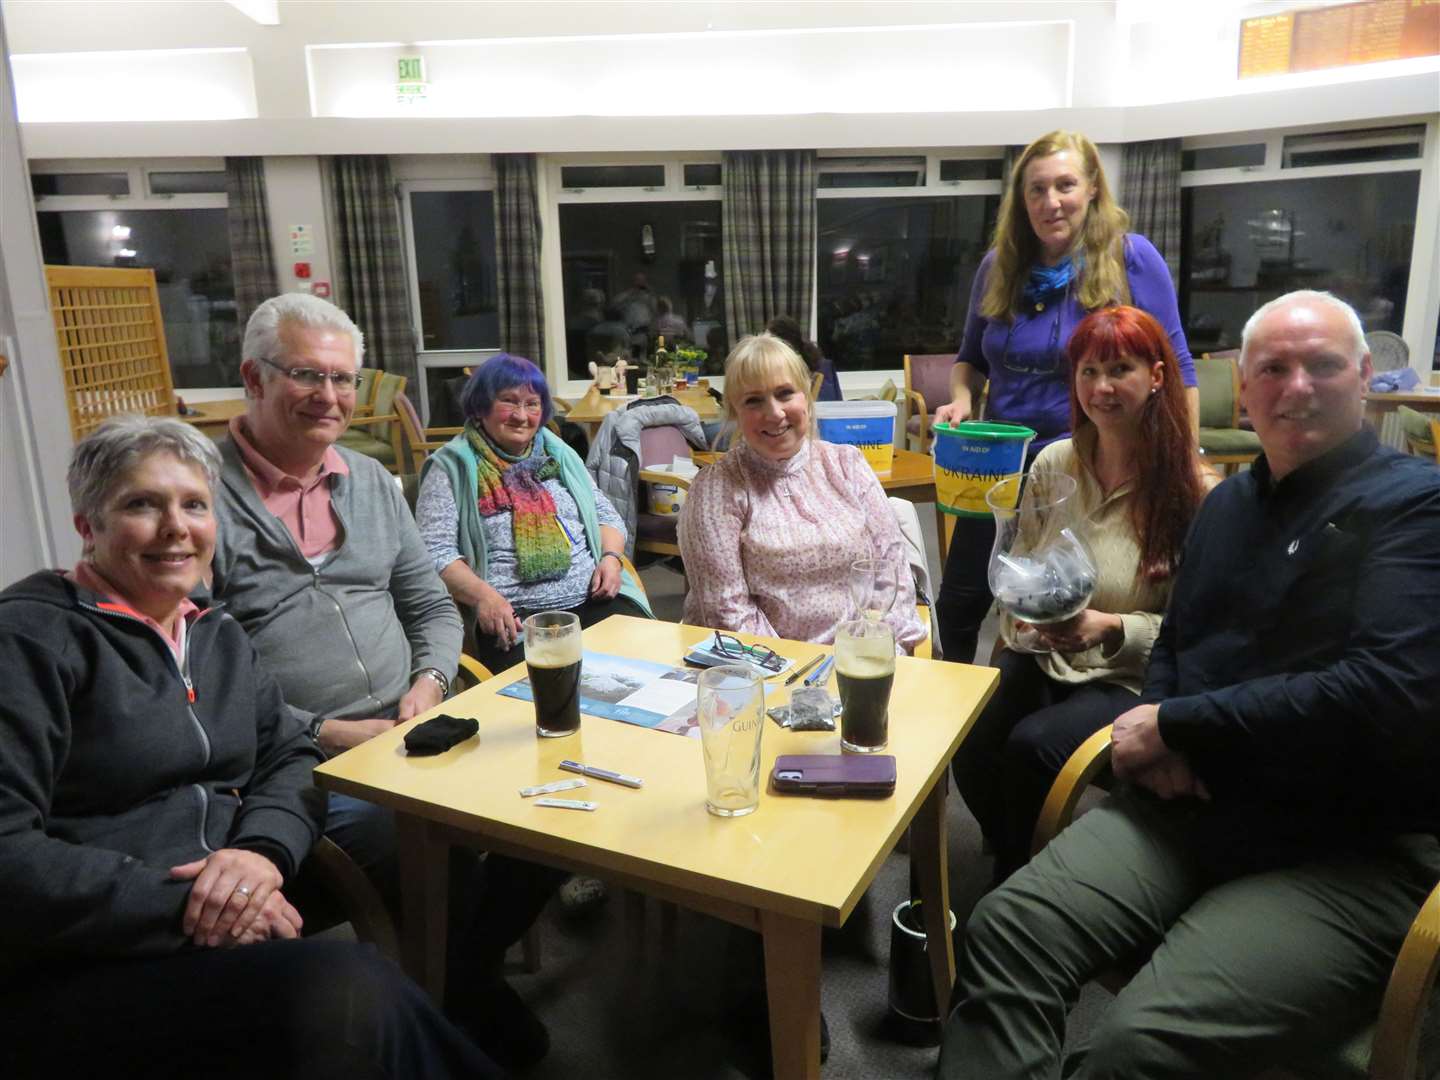 Those who took part in the quiz night at Brora Golf Club on Friday evening gave generously in aid of Ukrainian refugees.